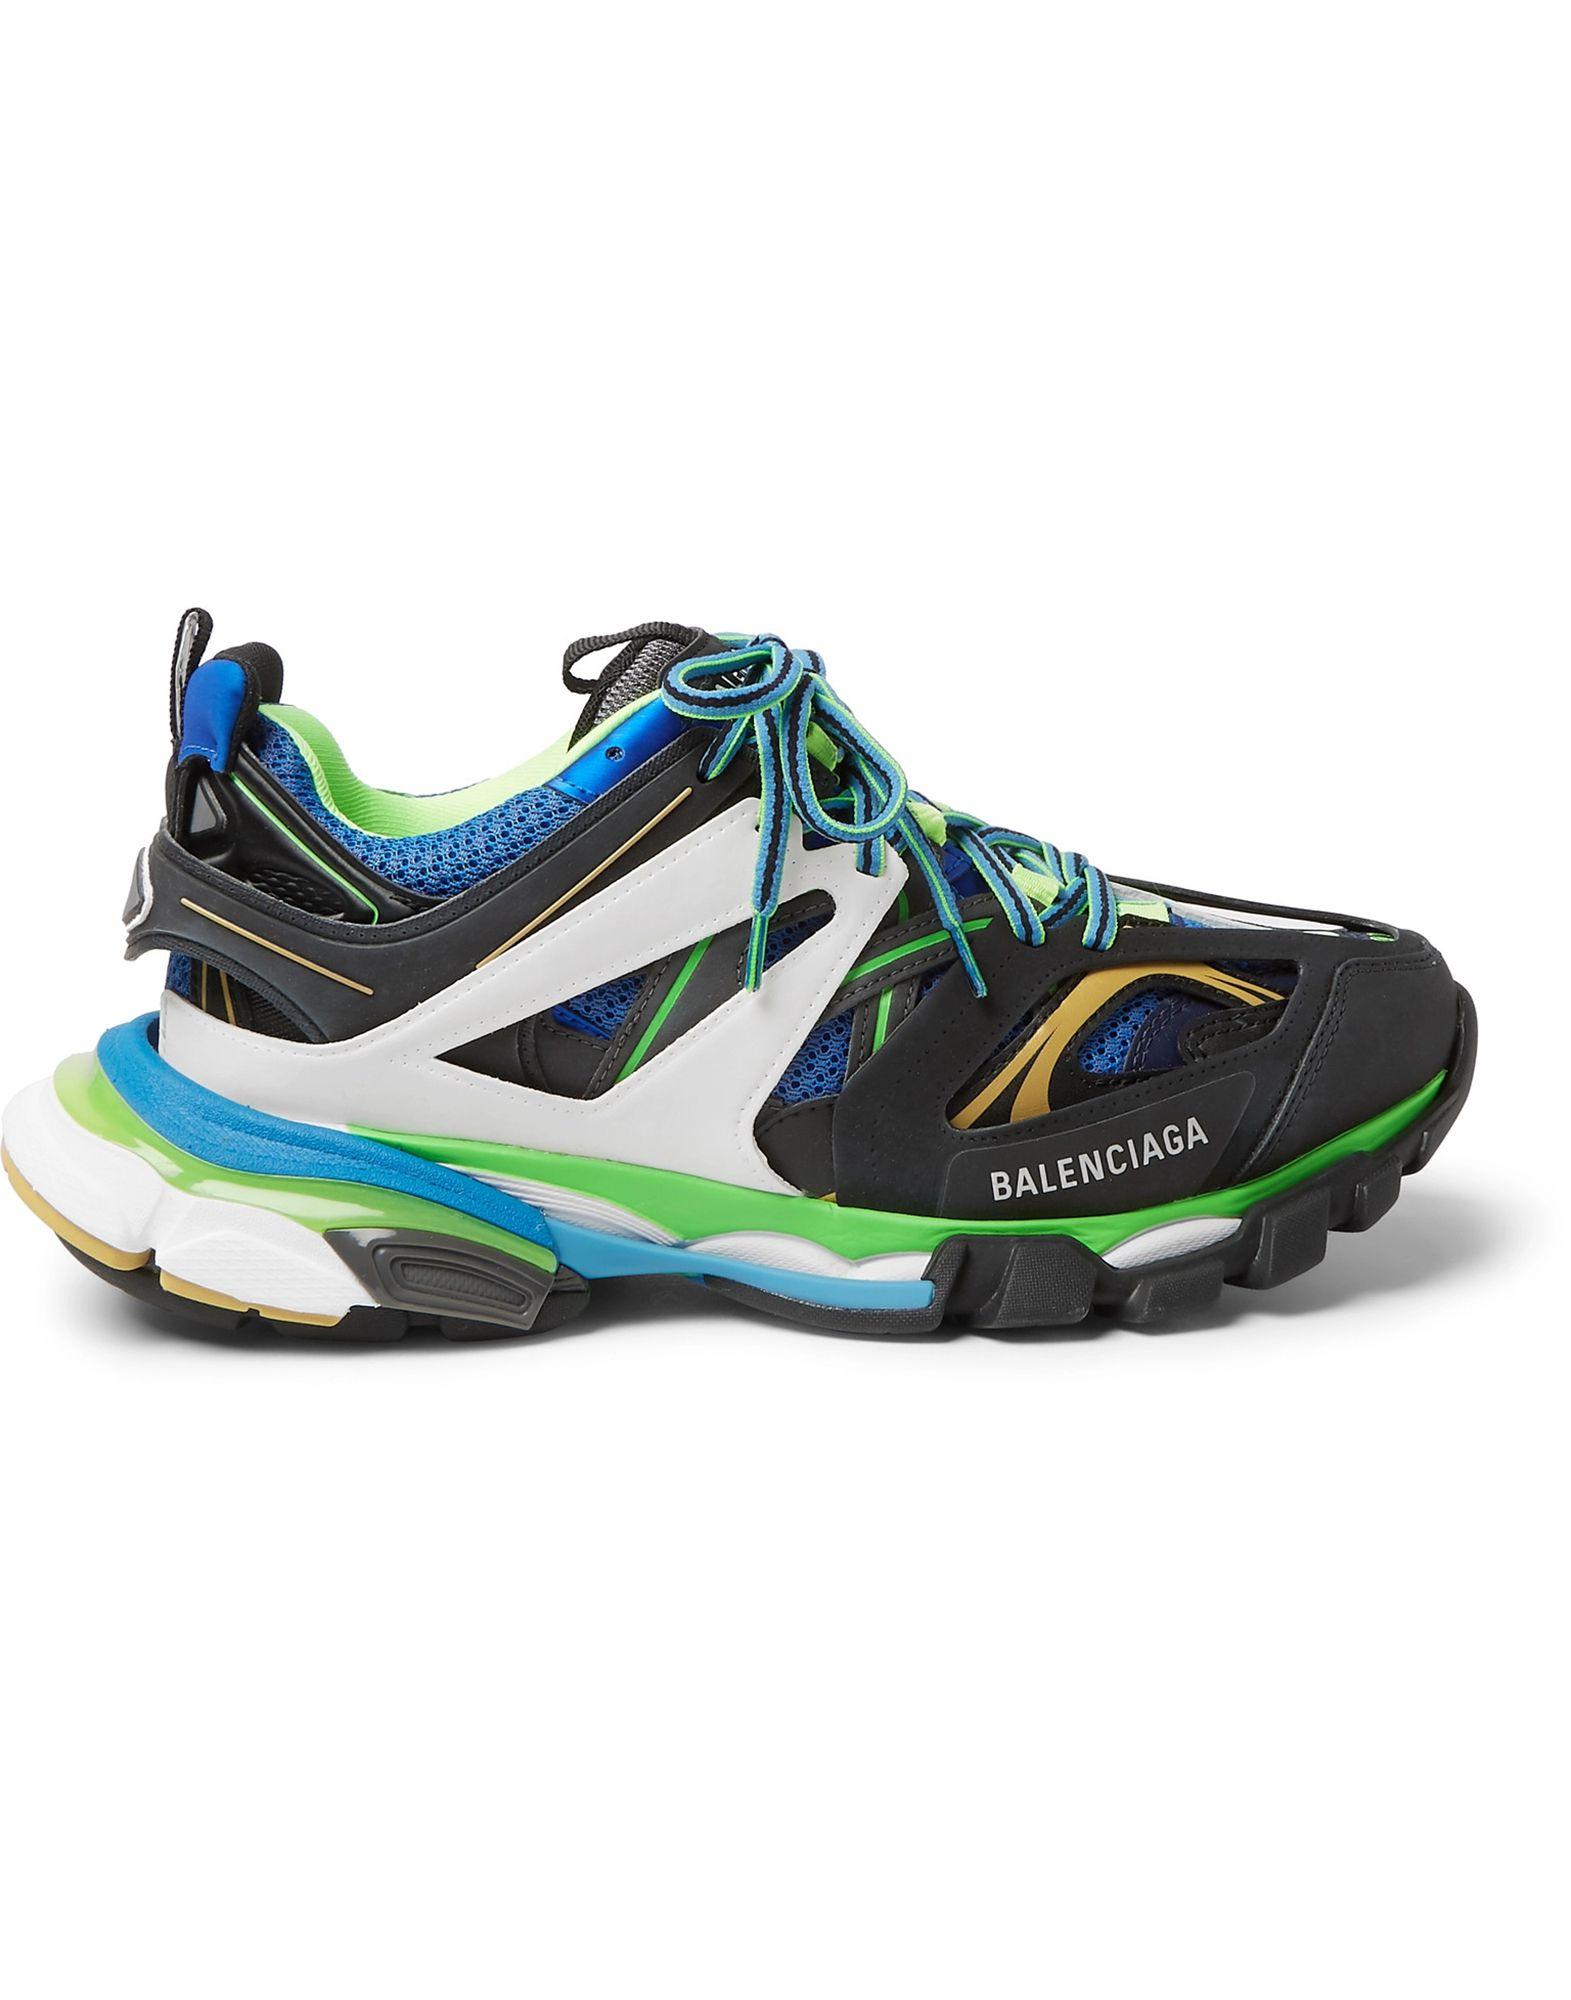 Balenciaga Leather Track Trainers in Blue/Green (Blue) for Men - Lyst